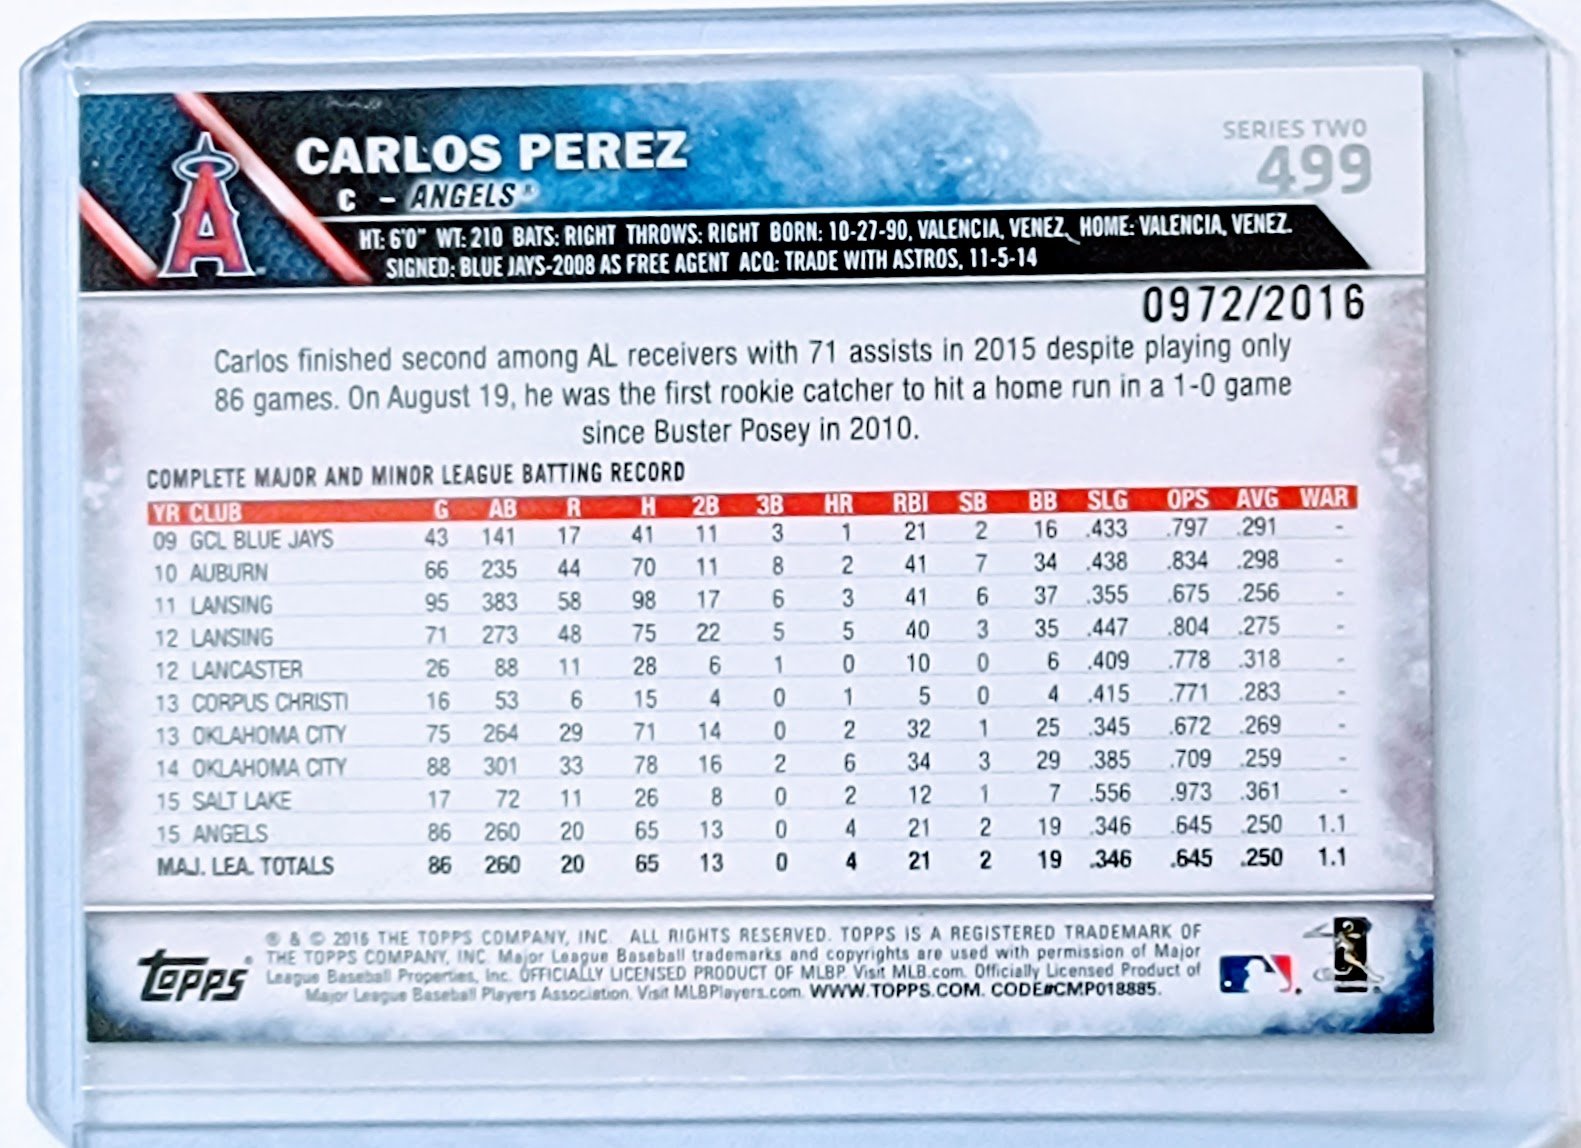 2016 Topps Carlos Perez w/ Mike Trout Gold #'d/2016 Parallel Baseball Card TPTV simple Xclusive Collectibles   